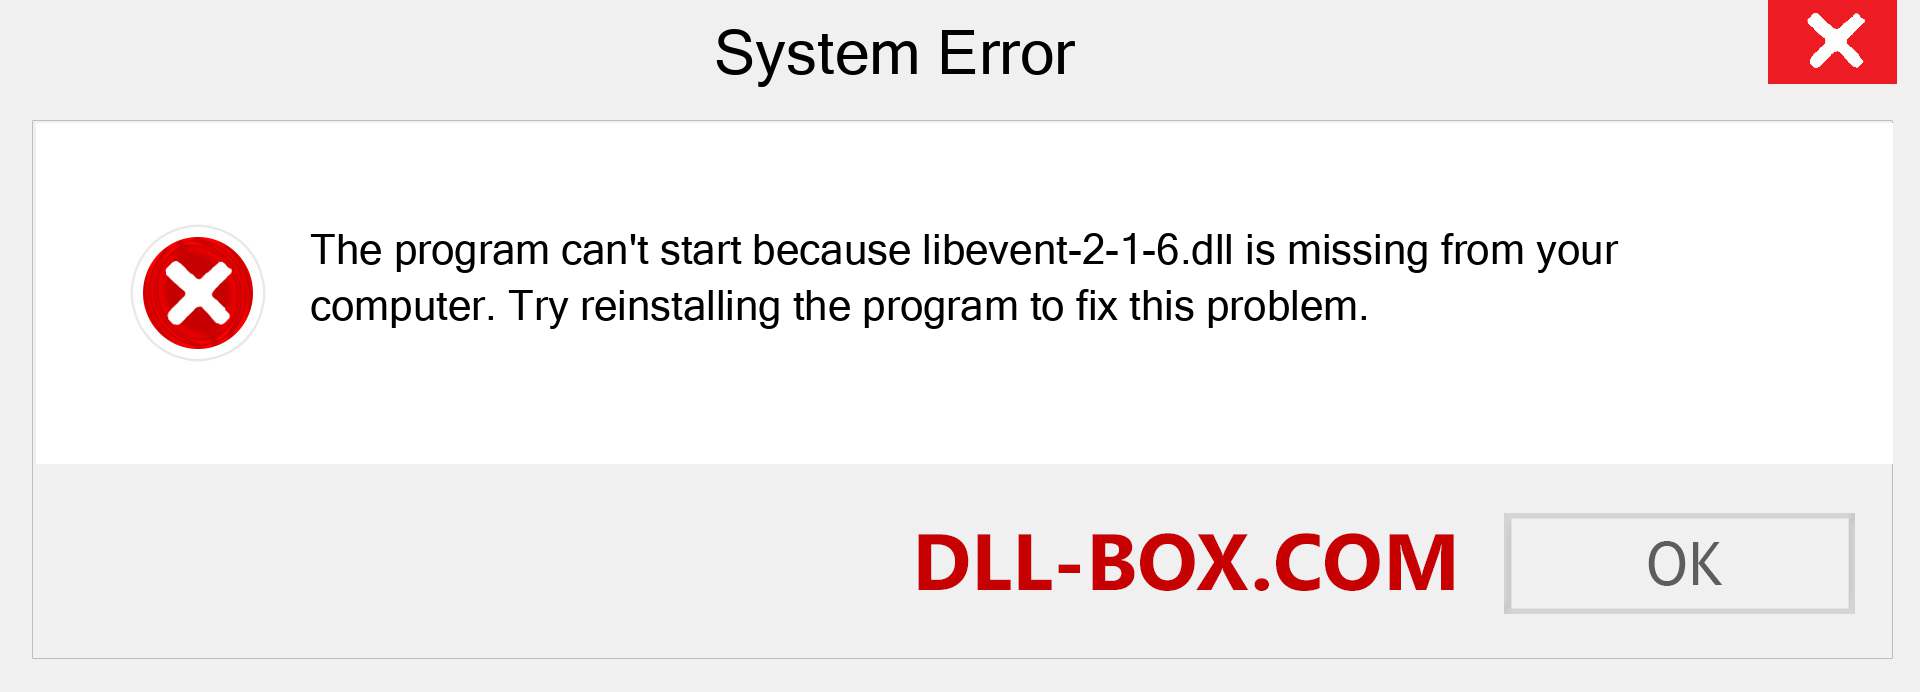  libevent-2-1-6.dll file is missing?. Download for Windows 7, 8, 10 - Fix  libevent-2-1-6 dll Missing Error on Windows, photos, images